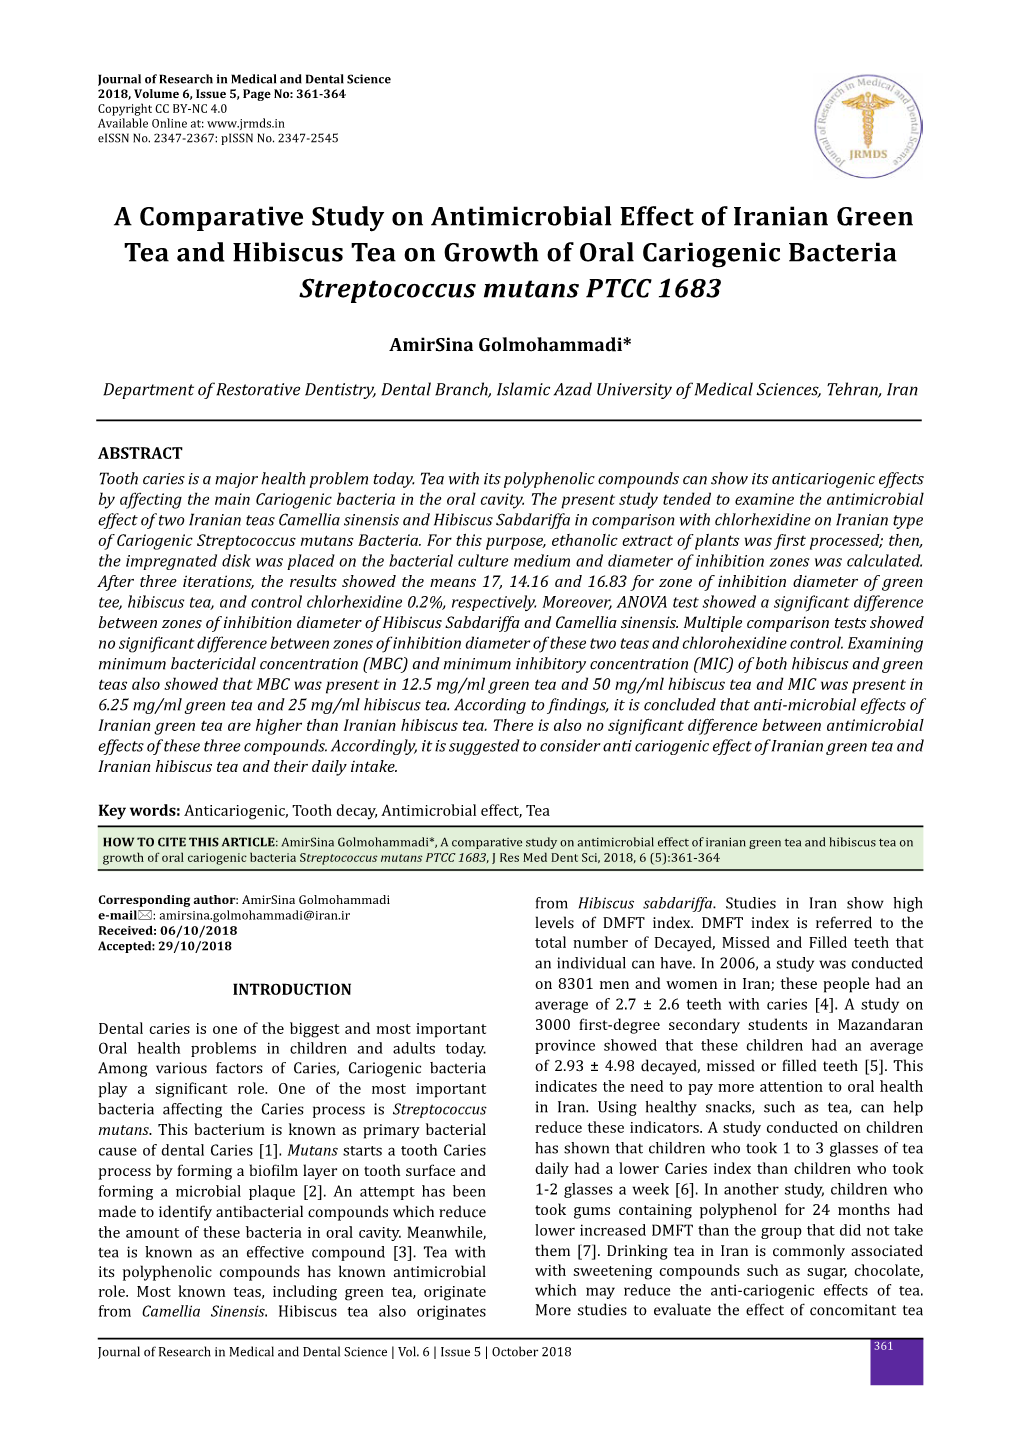 A Comparative Study on Antimicrobial Effect of Iranian Green Tea and Hibiscus Tea on Growth of Oral Cariogenic Bacteria Streptococcus Mutans PTCC 1683